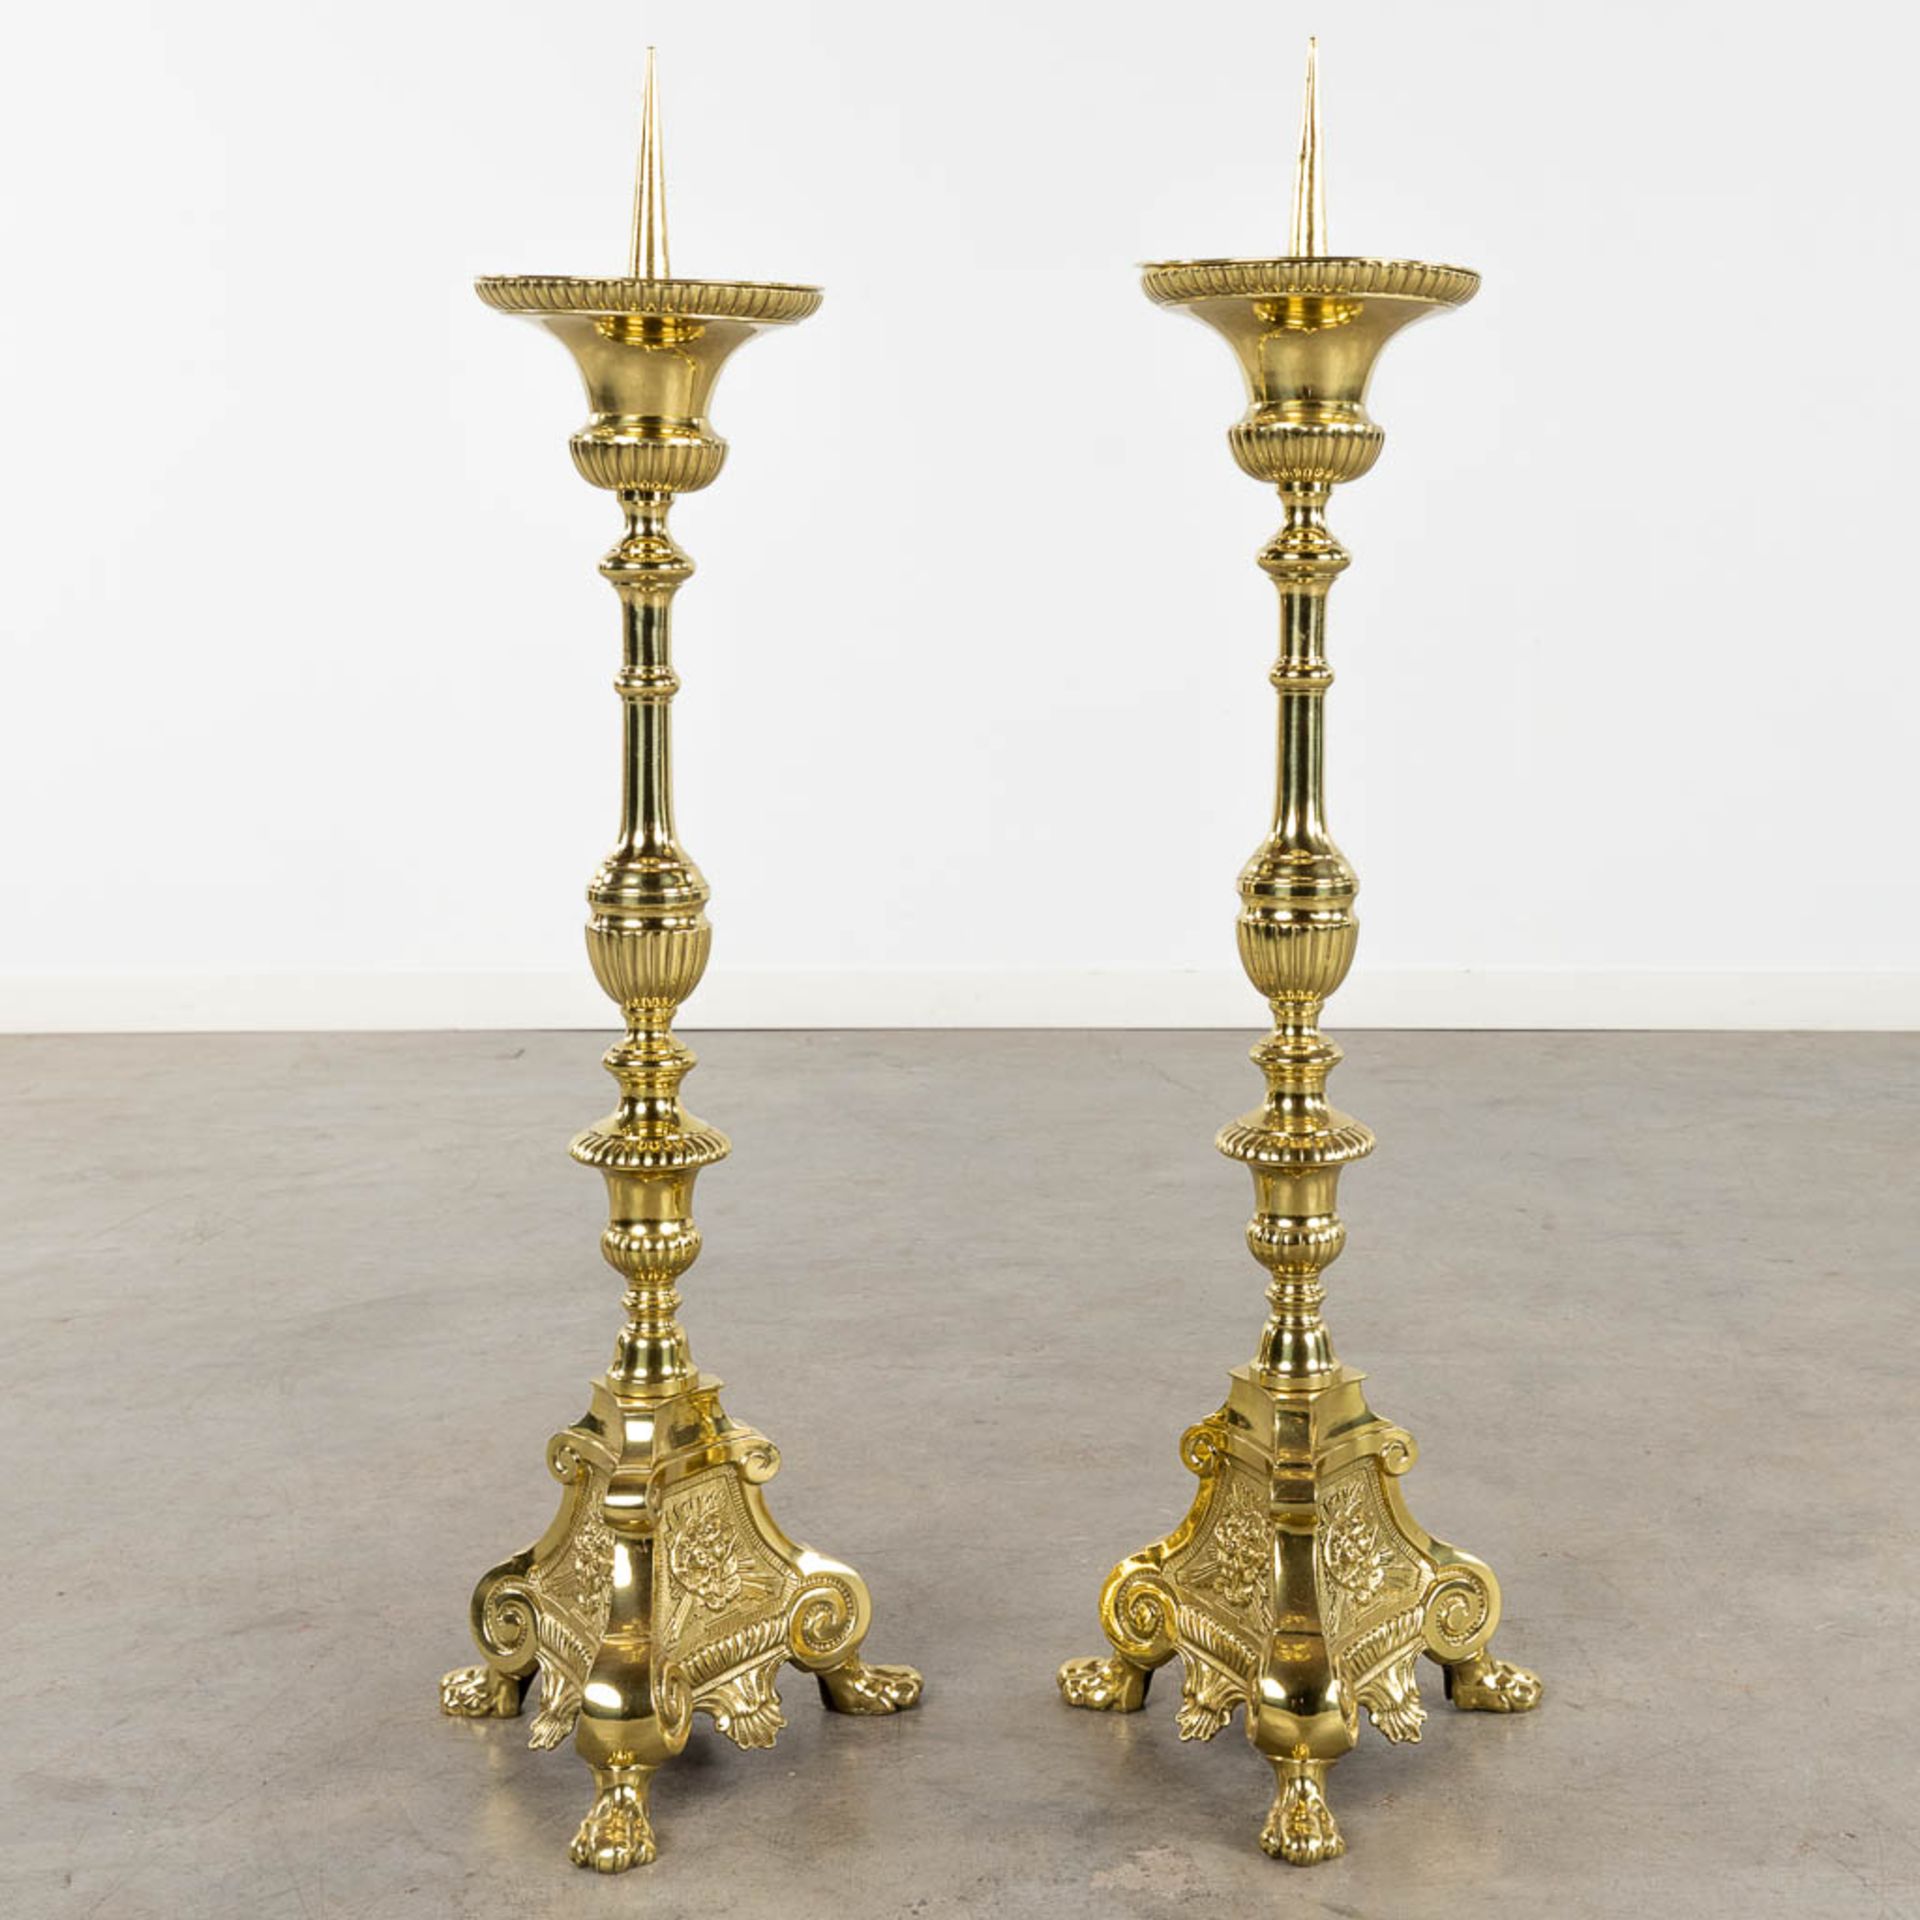 A pair of church candlesticks or candle holders polished bronze. 19th C. (D:24 x W:27 x H:88 cm) - Image 3 of 15